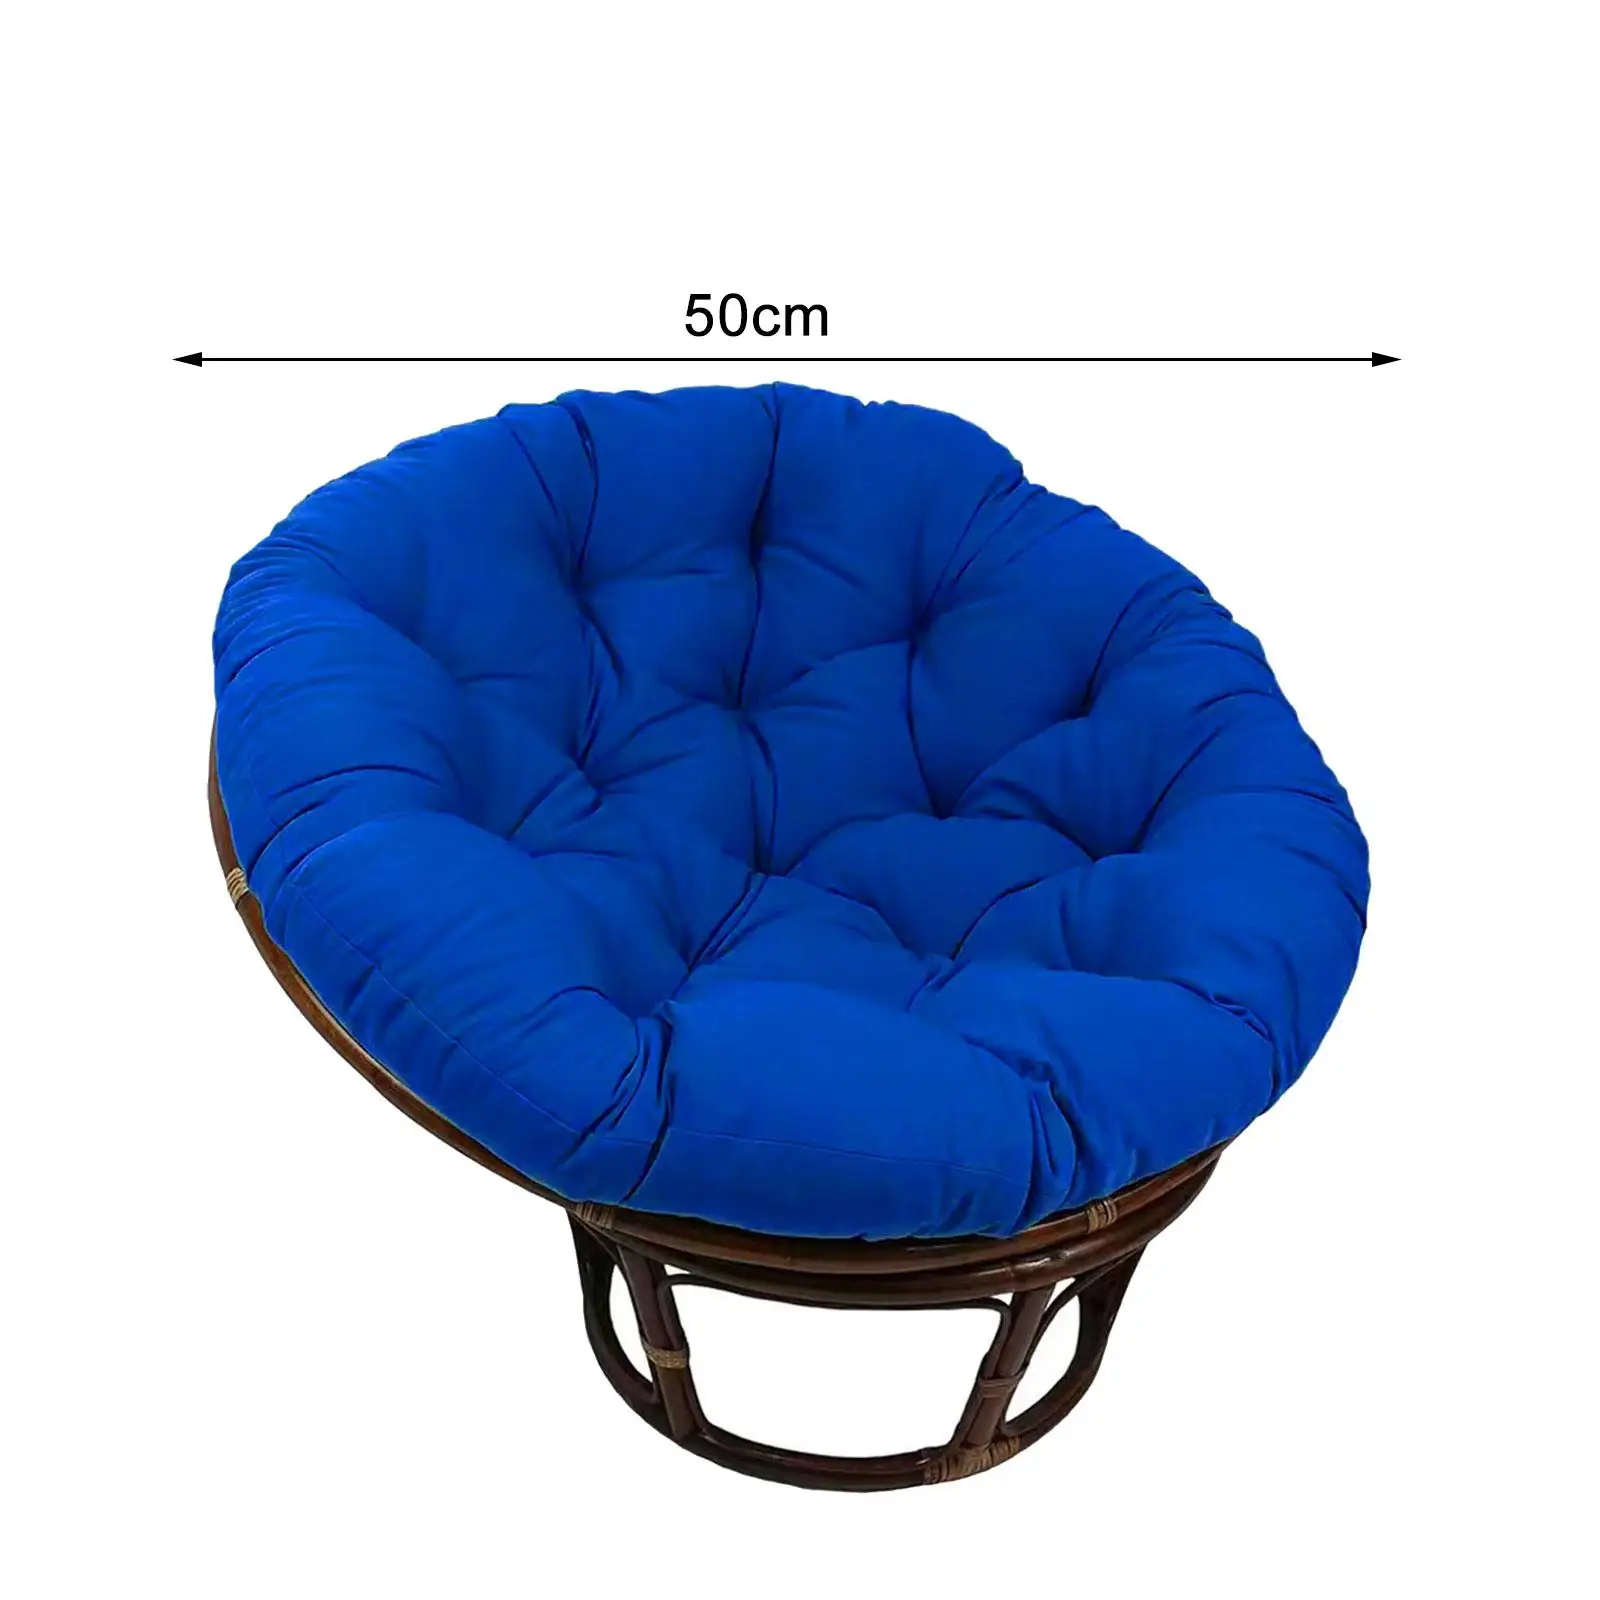 Hanging Chair Cushion Comfortable Round Papasan Chair Cushion Soft Chair Pad for Living Room Indoor Outdoor Patio Kitchen Home